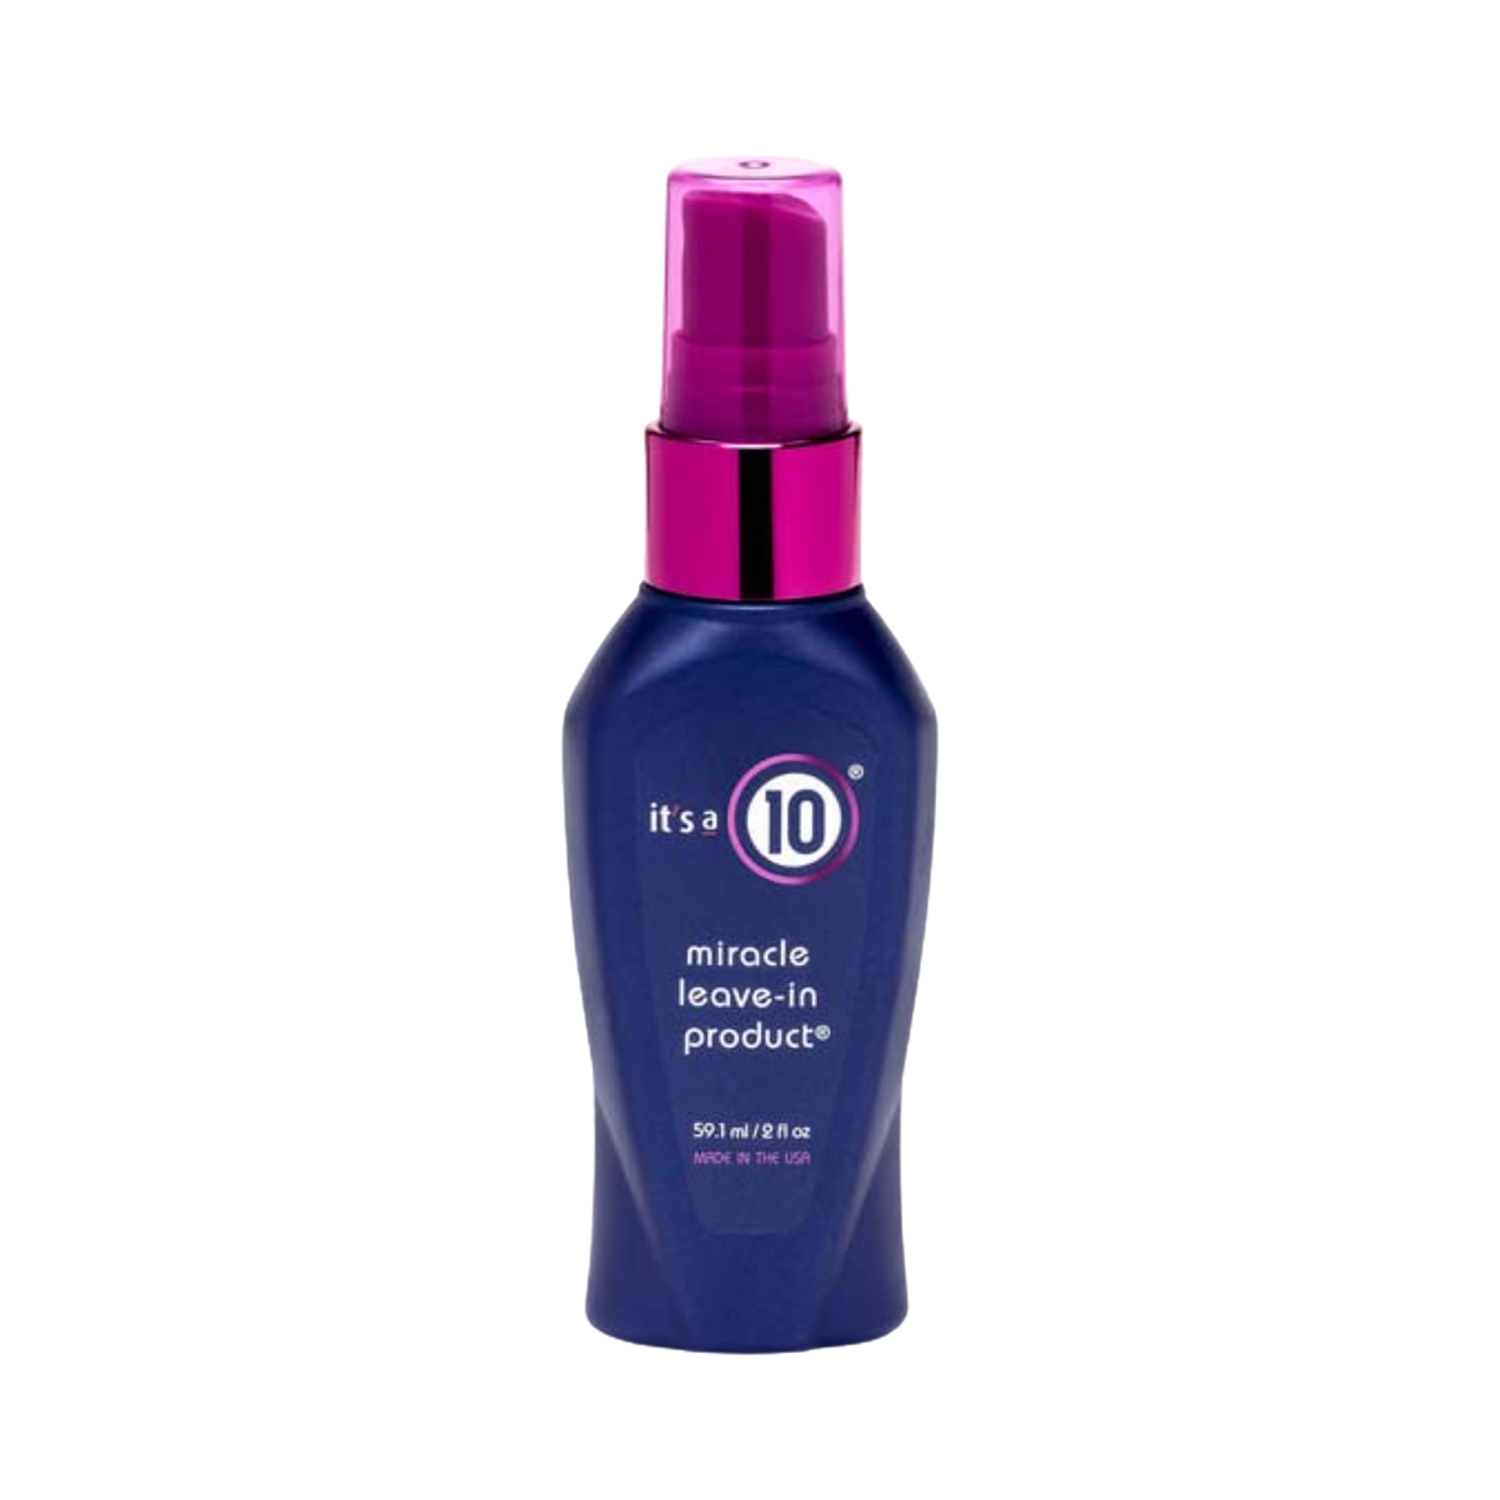 It's a 10 Haircare | It's a 10 Haircare Miracle Leave In Product (59.1ml)